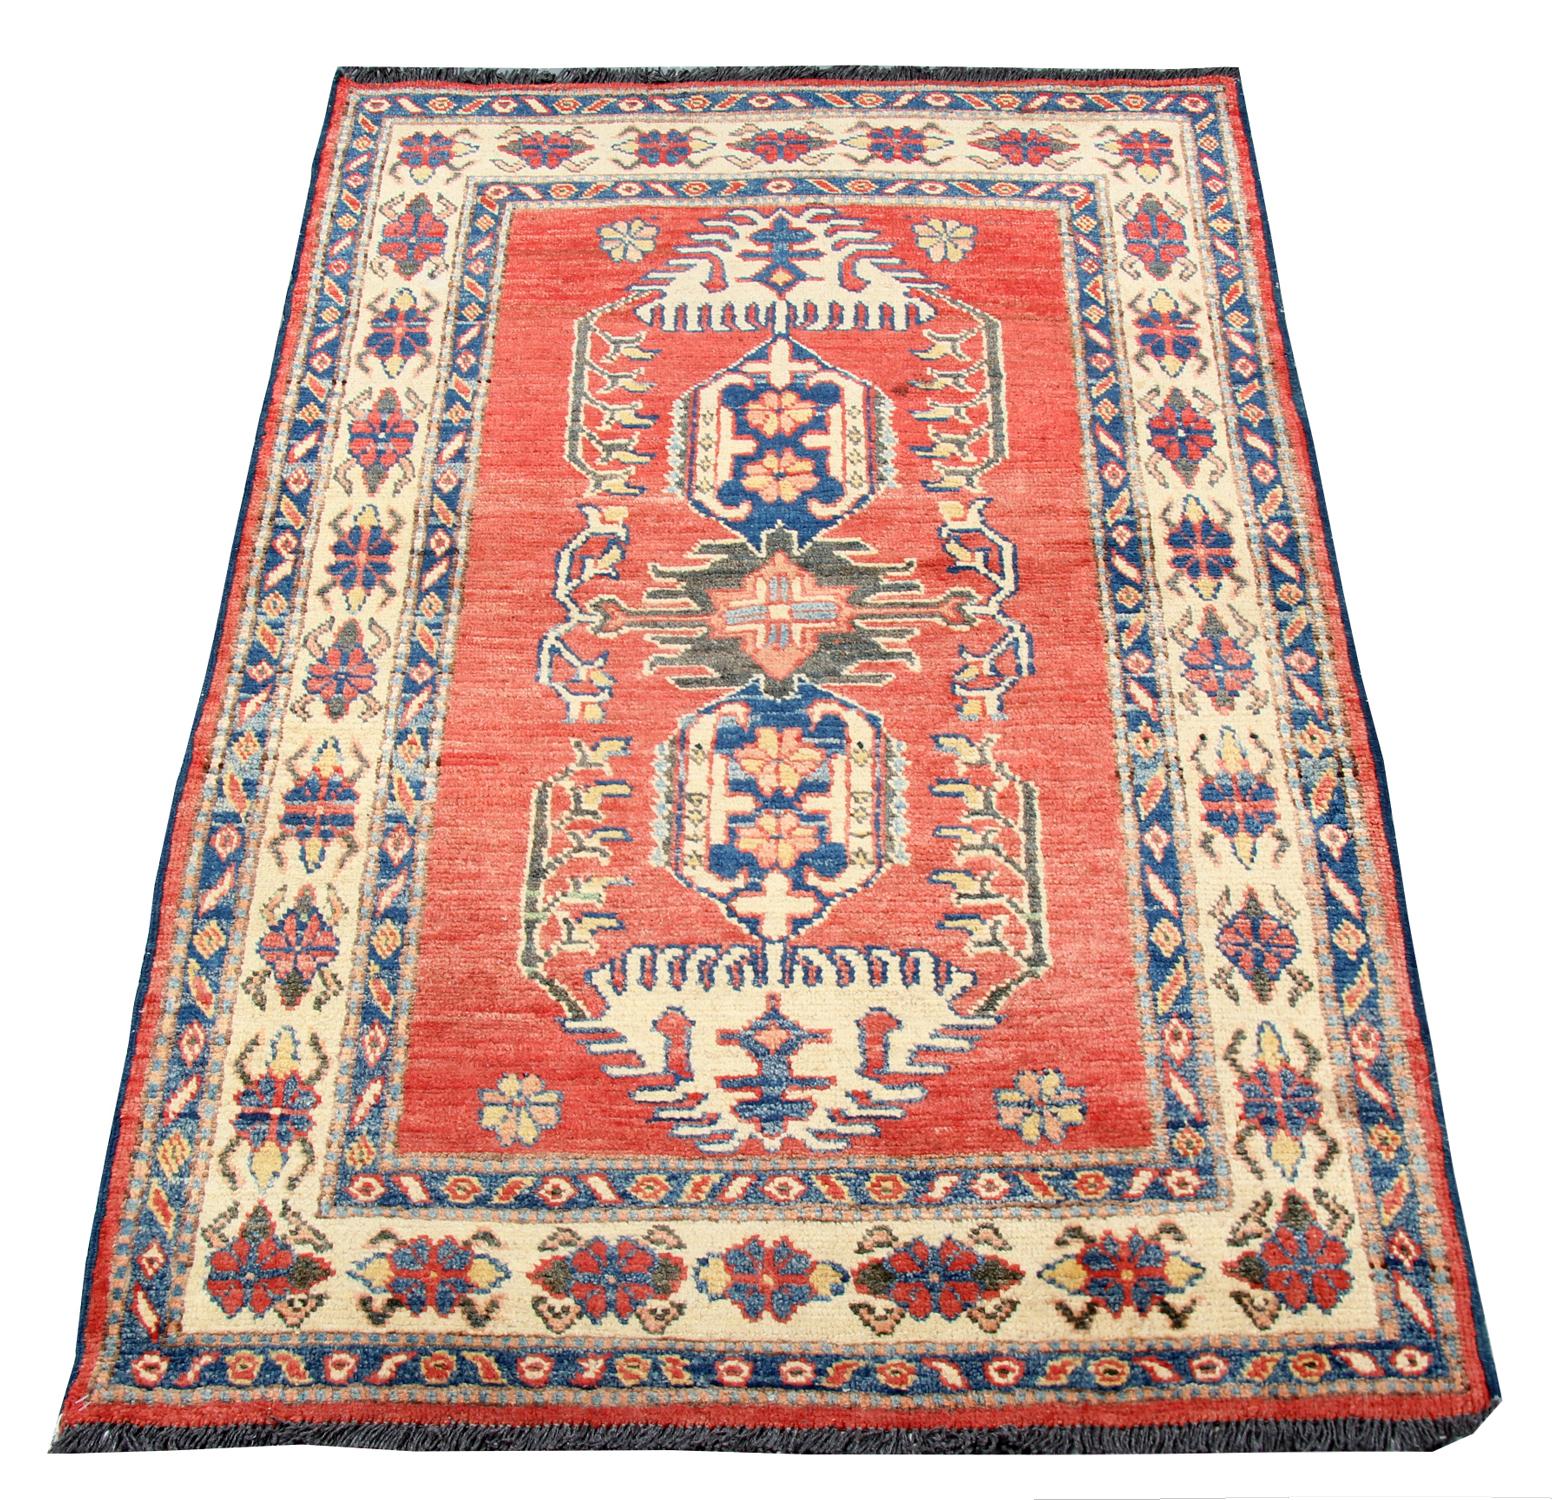 This fine wool rug was woven by hand in Afghanistan in the early 2000s. The central design features a traditional geometric motif design woven in accents of cream blue and green on a rich red background. Both the colour and style in this piece are